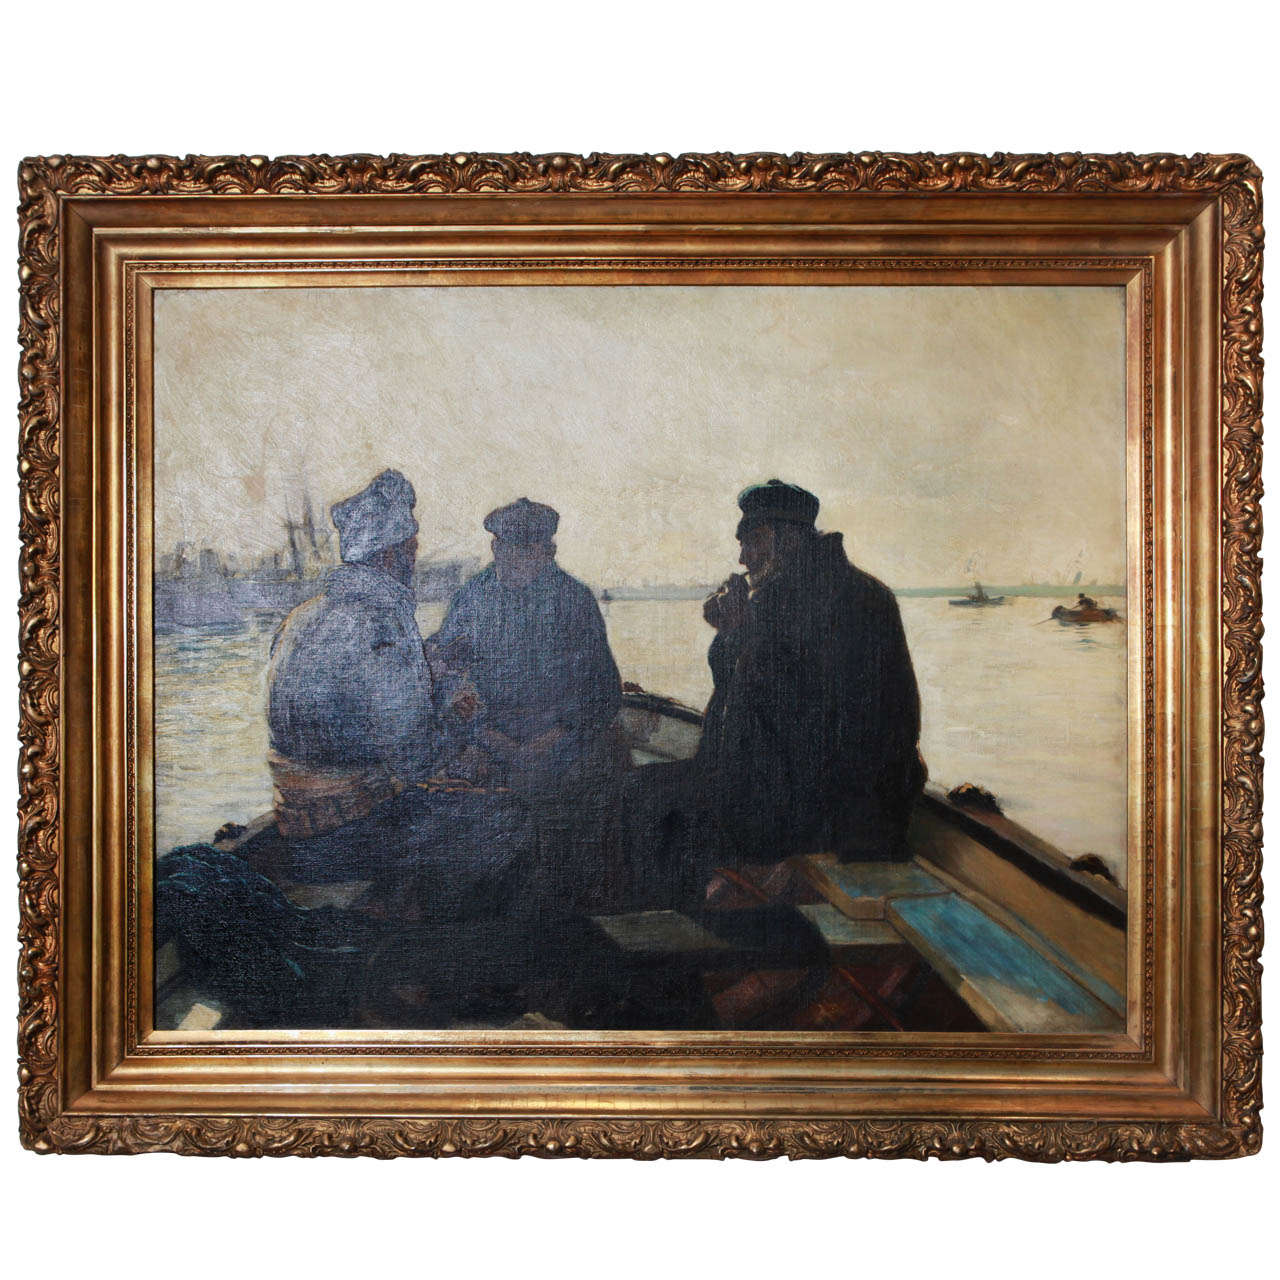 Three Fishermen on the Boat For Sale